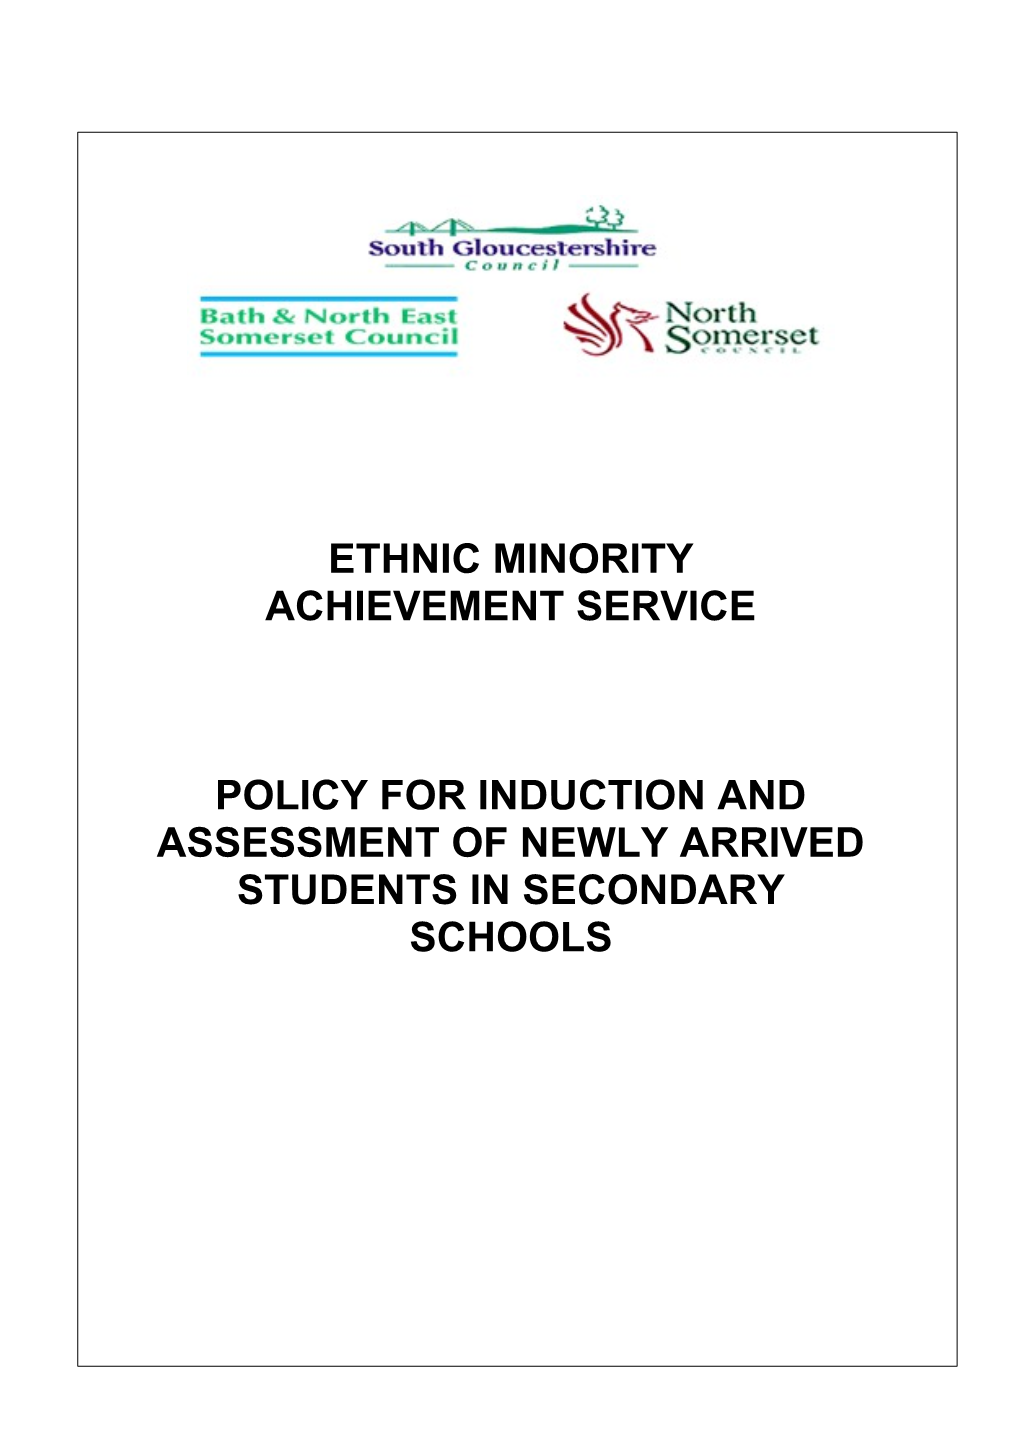 Policy for Induction and Assessment of Newly Arrived Students in Secondary Schools